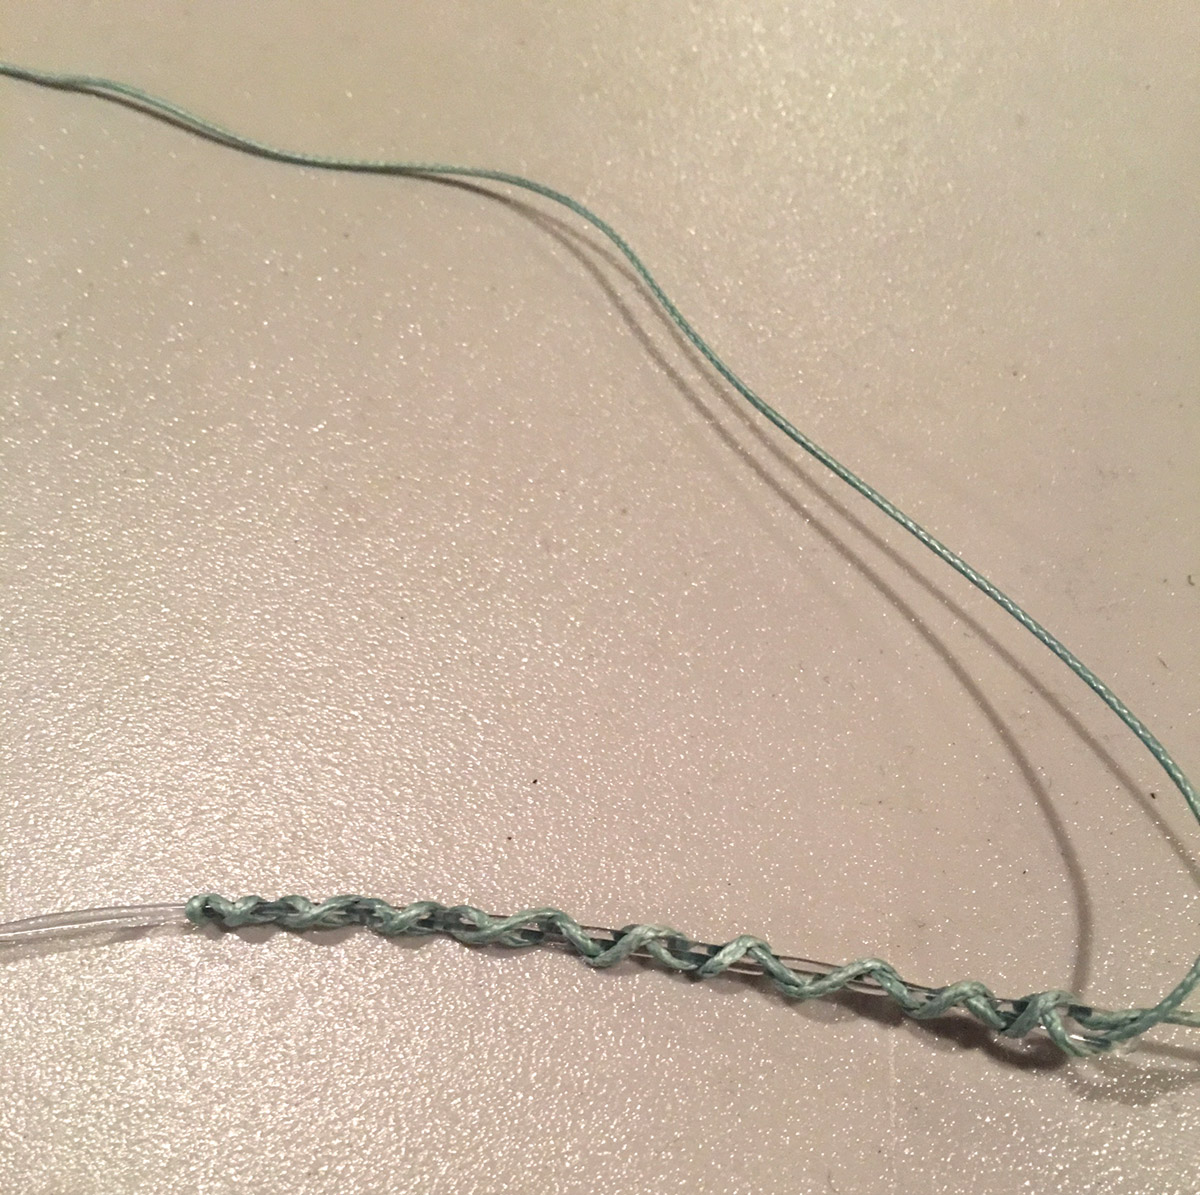 Alberto knot connecting braid and mono. 